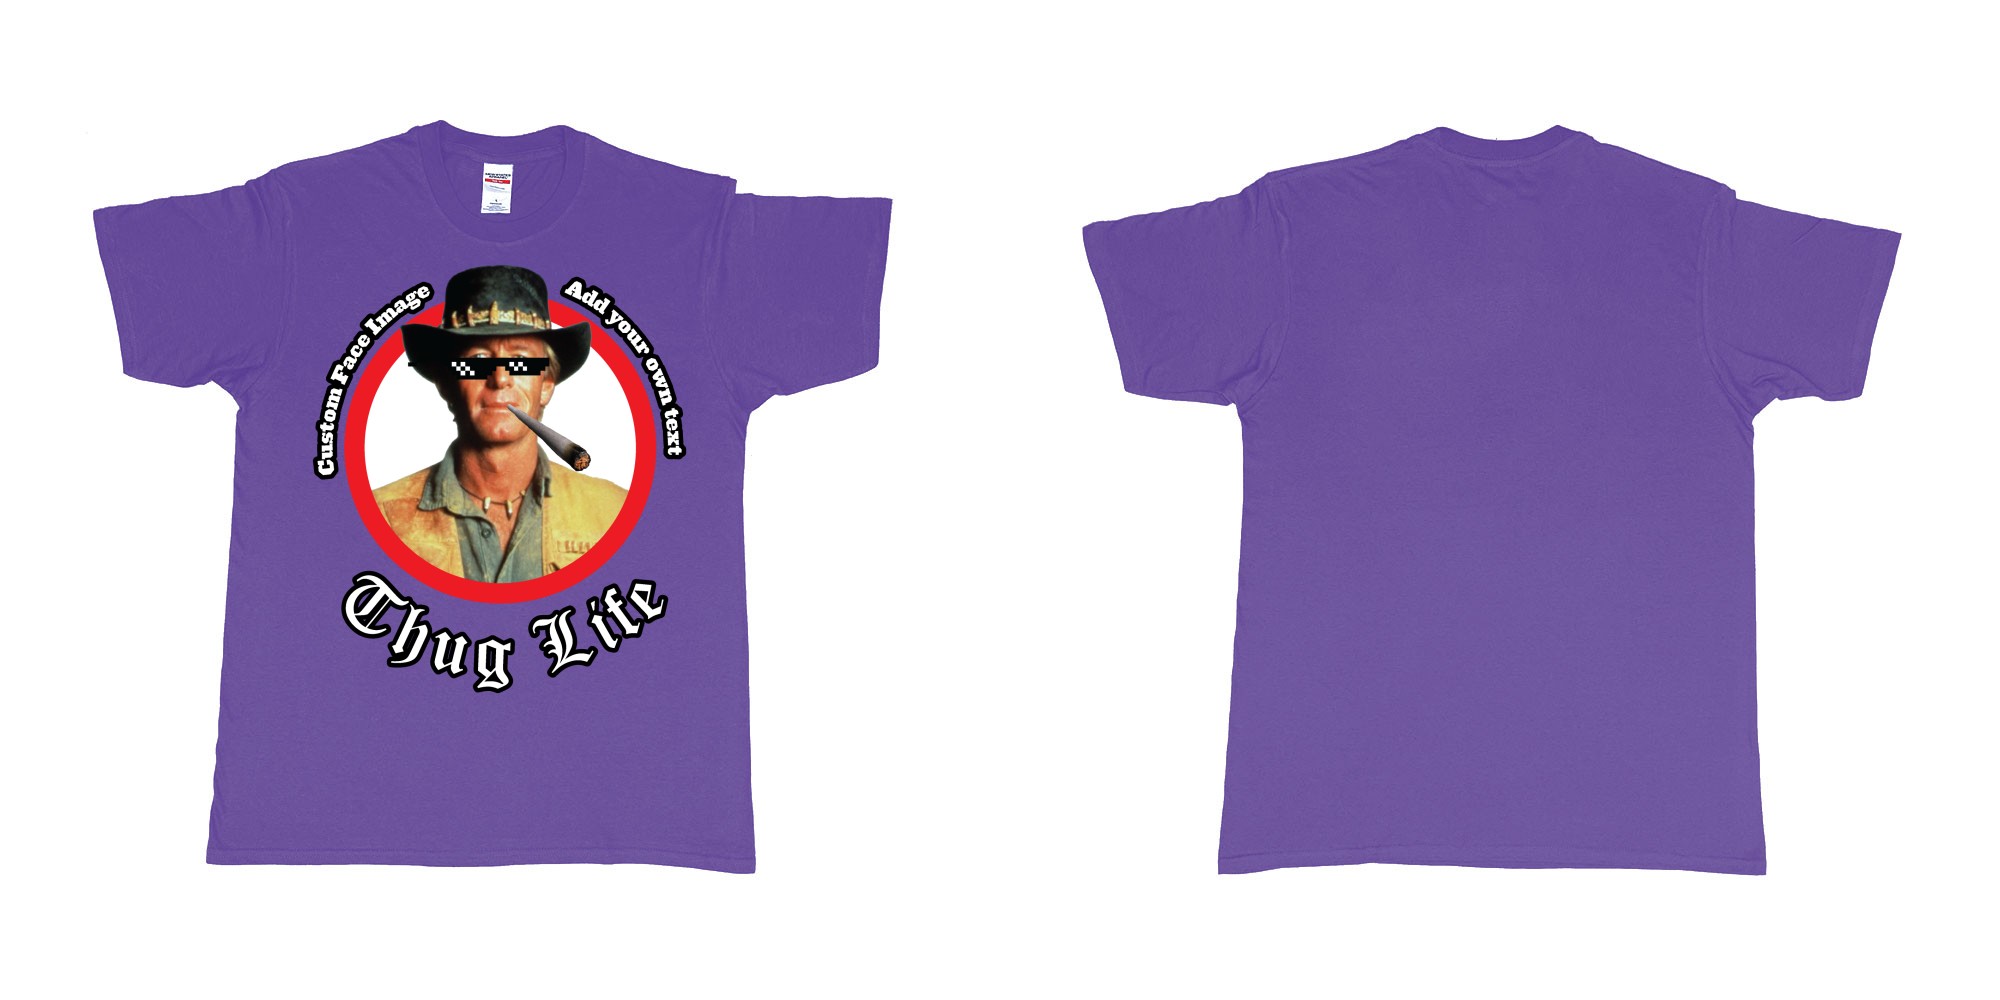 Custom tshirt design thug life meme sunglasses joint custom image in fabric color purple choice your own text made in Bali by The Pirate Way